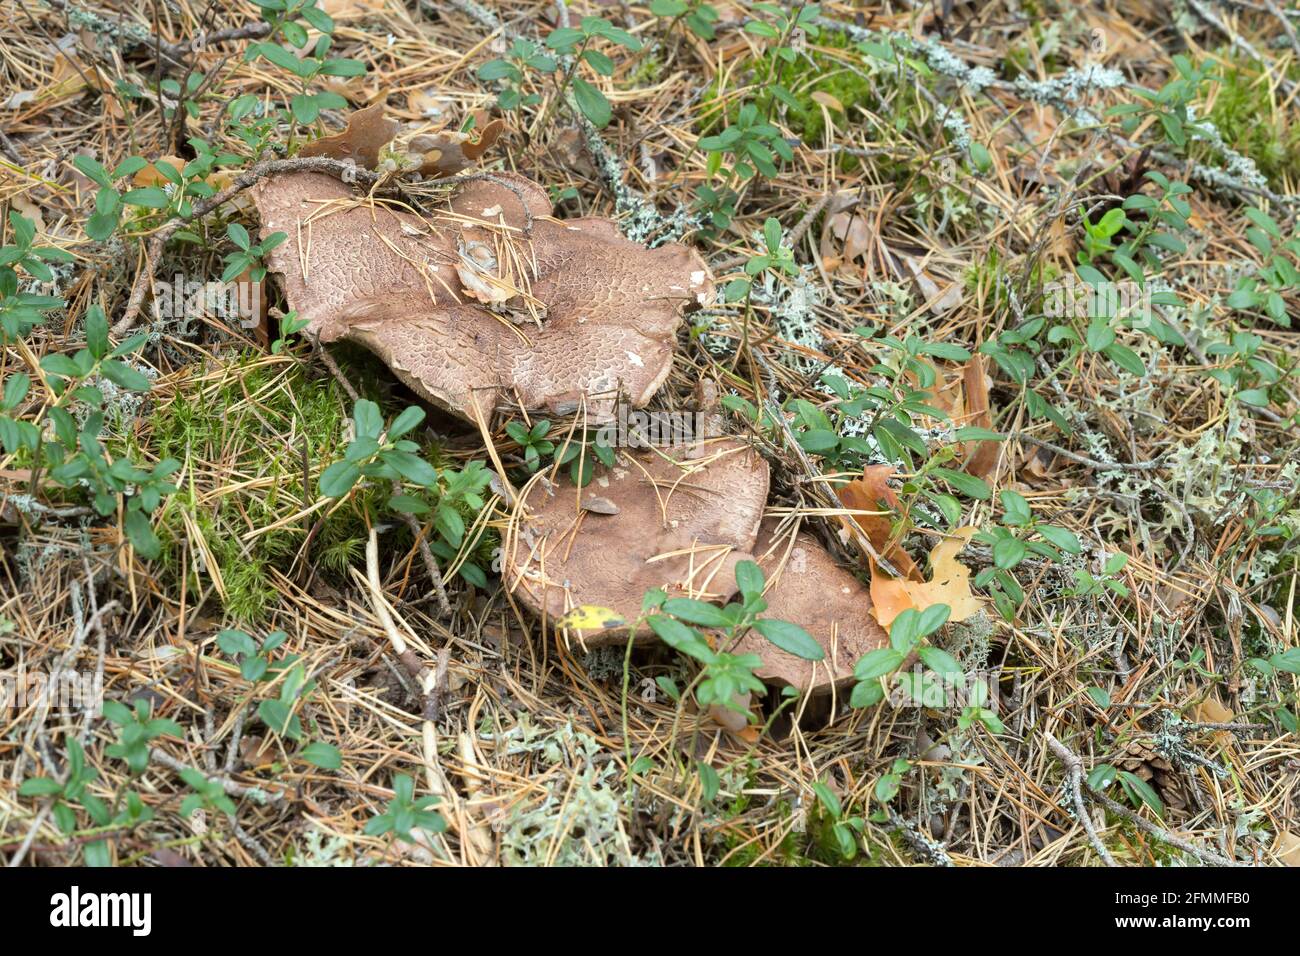 Bitter tooth fungus, Sarcodon scabrosus growing in coniferous environment Stock Photo